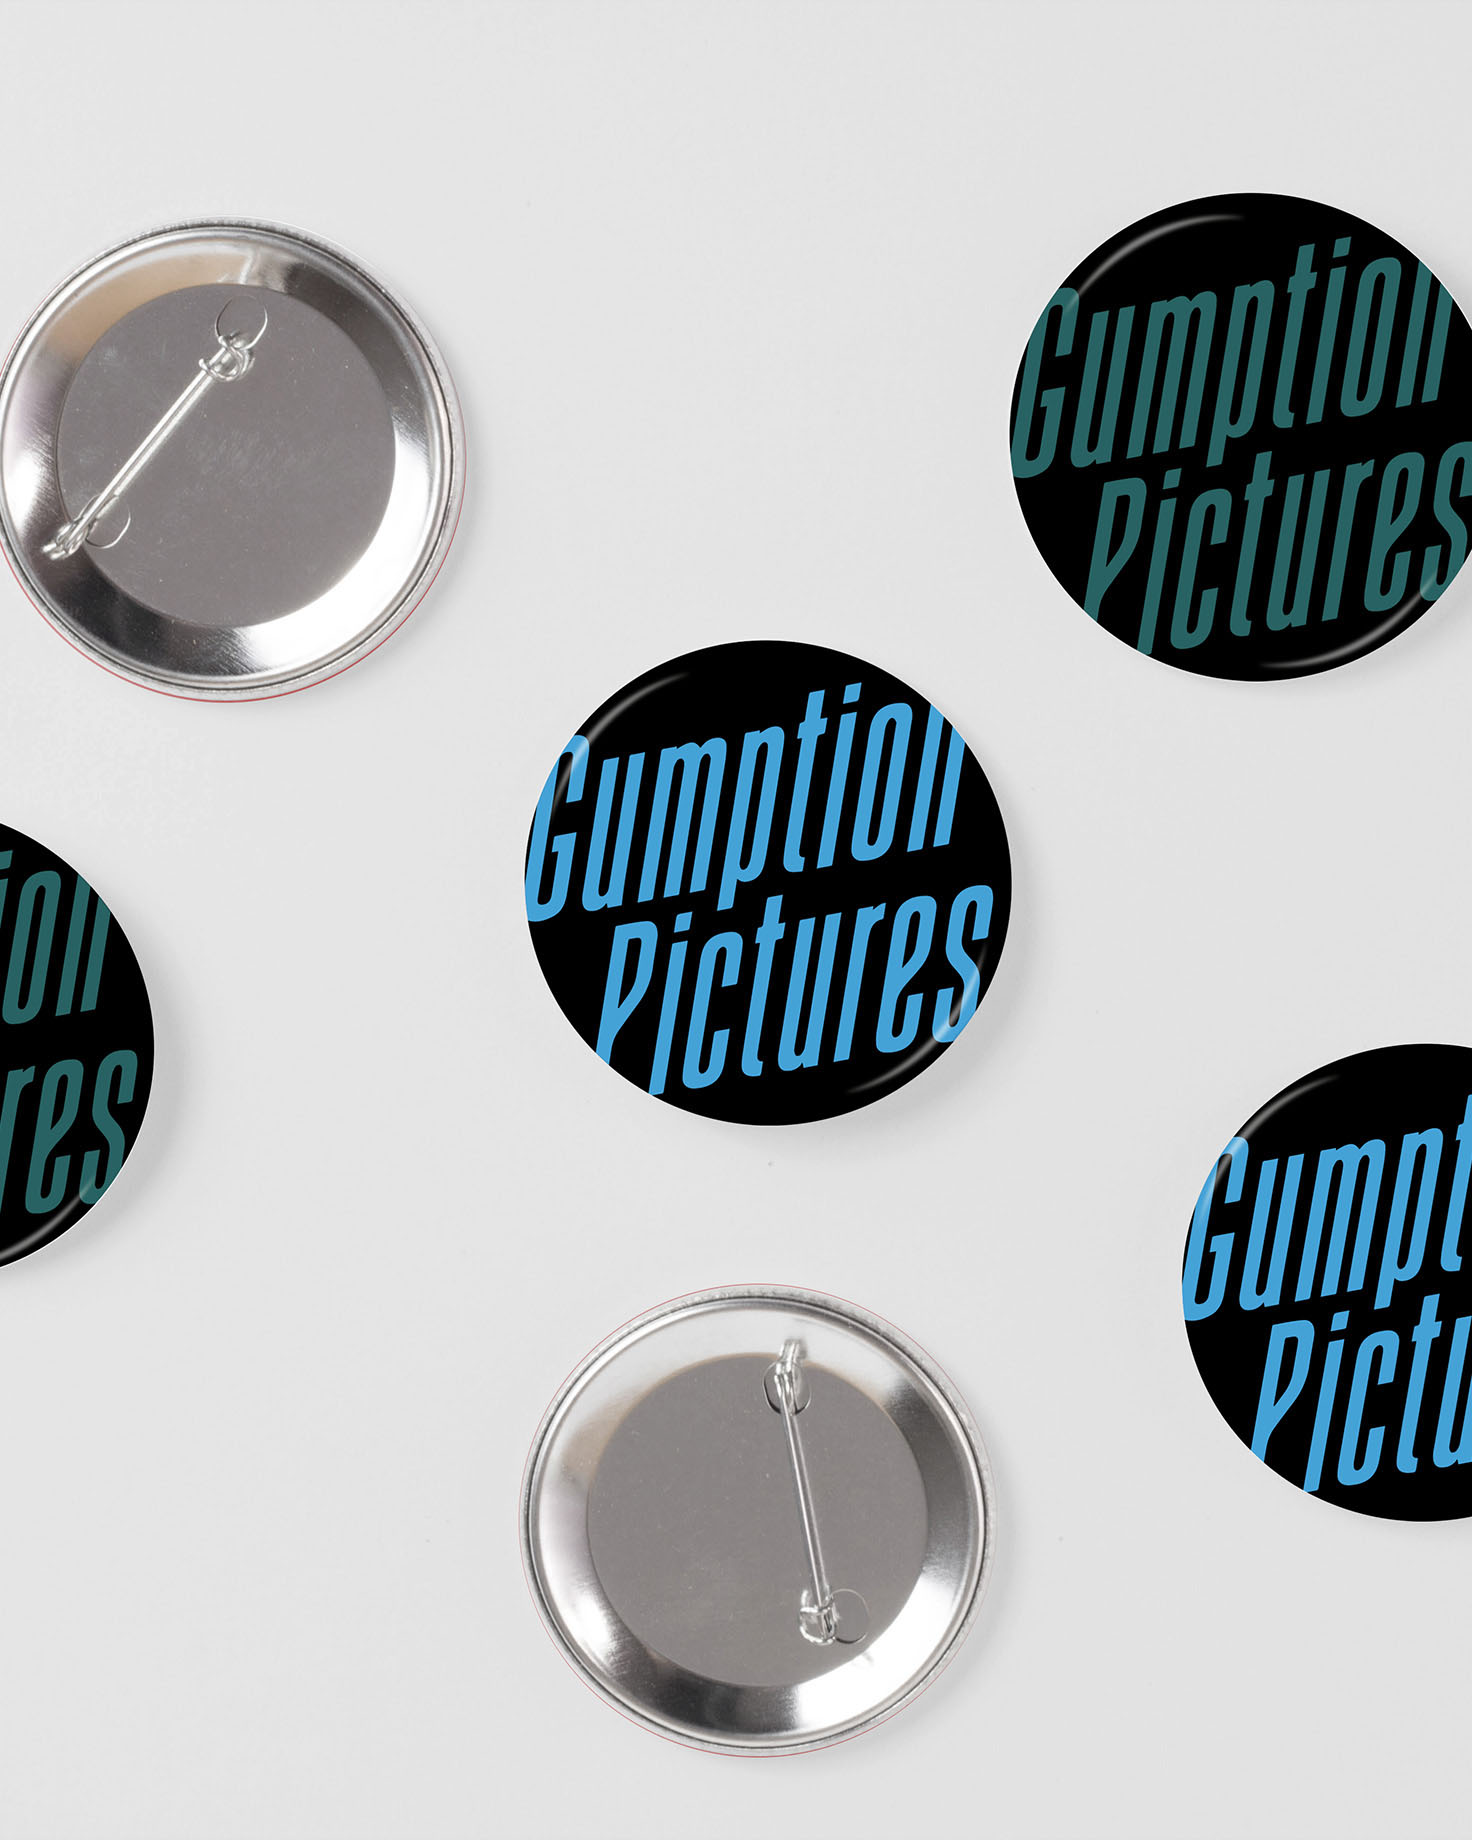 Brand logo on buttons - Gumption Pictures - Whiskey and Red Small Business Branding and Website Design Packages